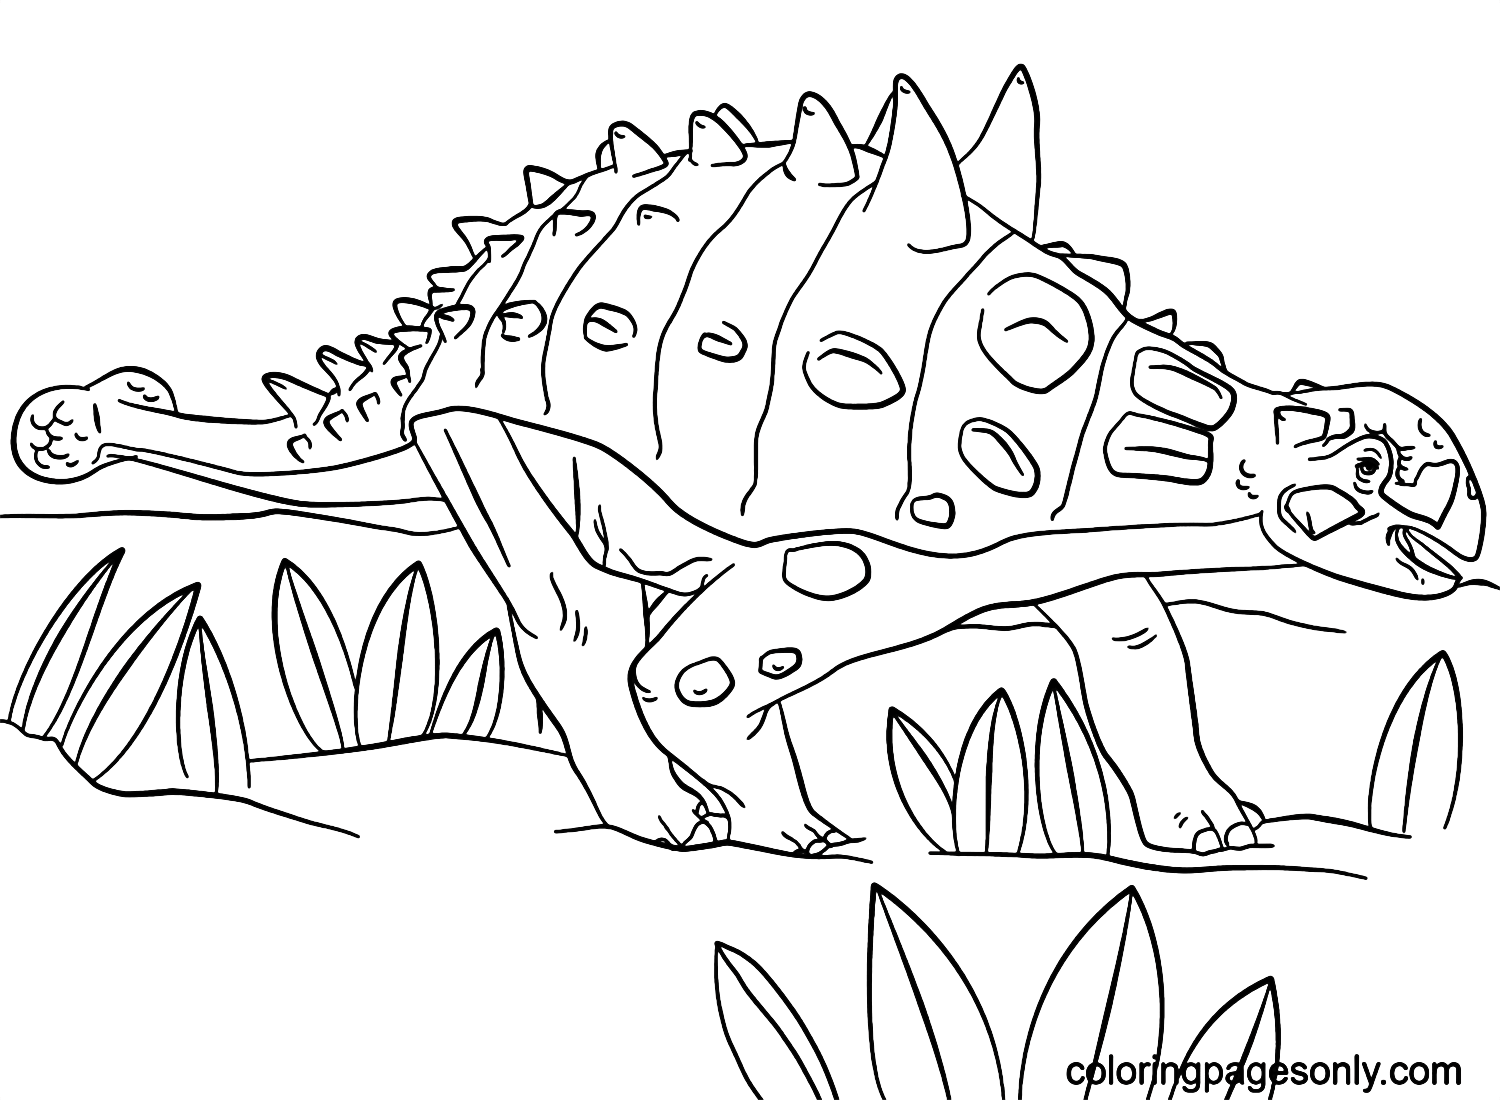 Free Printable Jurassic Park Euoplocephalus Coloring Pages